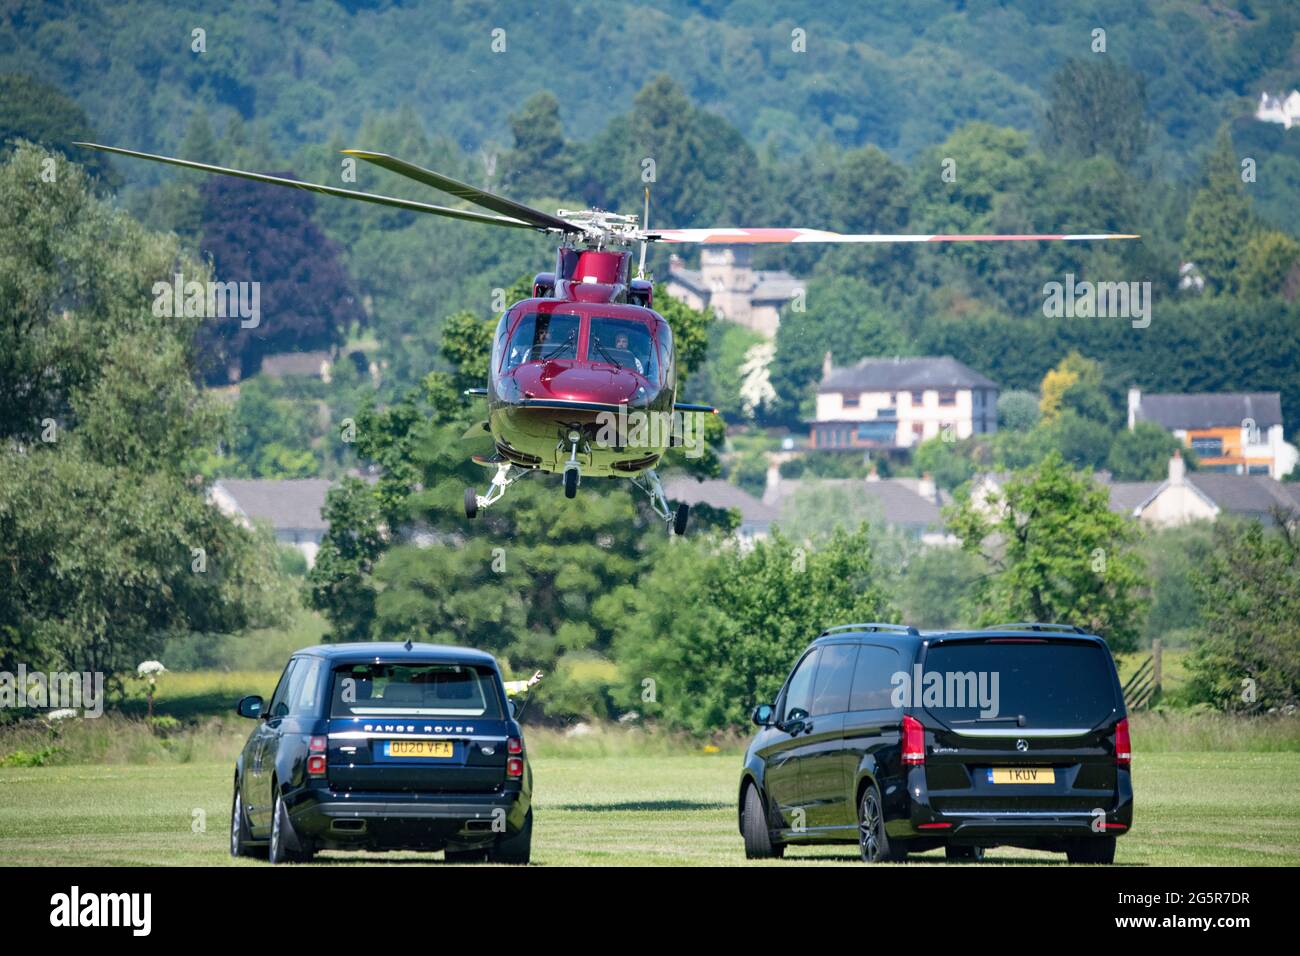 Stirling, Scotland, UK. 29th June, 2021. PICTURED: Her Majesty The Queen Elizabeth II flies in on her private Sikorsky helicopter (registered: XXEB) on the hottest day this year landing at Stirling Rugby ground, on route to Stirling Castle for the reopening of The Argyle and Sutherland Highlander's Museum at Stirling Castle. The Royal standard was flying whilst she was at the castle. Credit: Colin Fisher/Alamy Live News Stock Photo